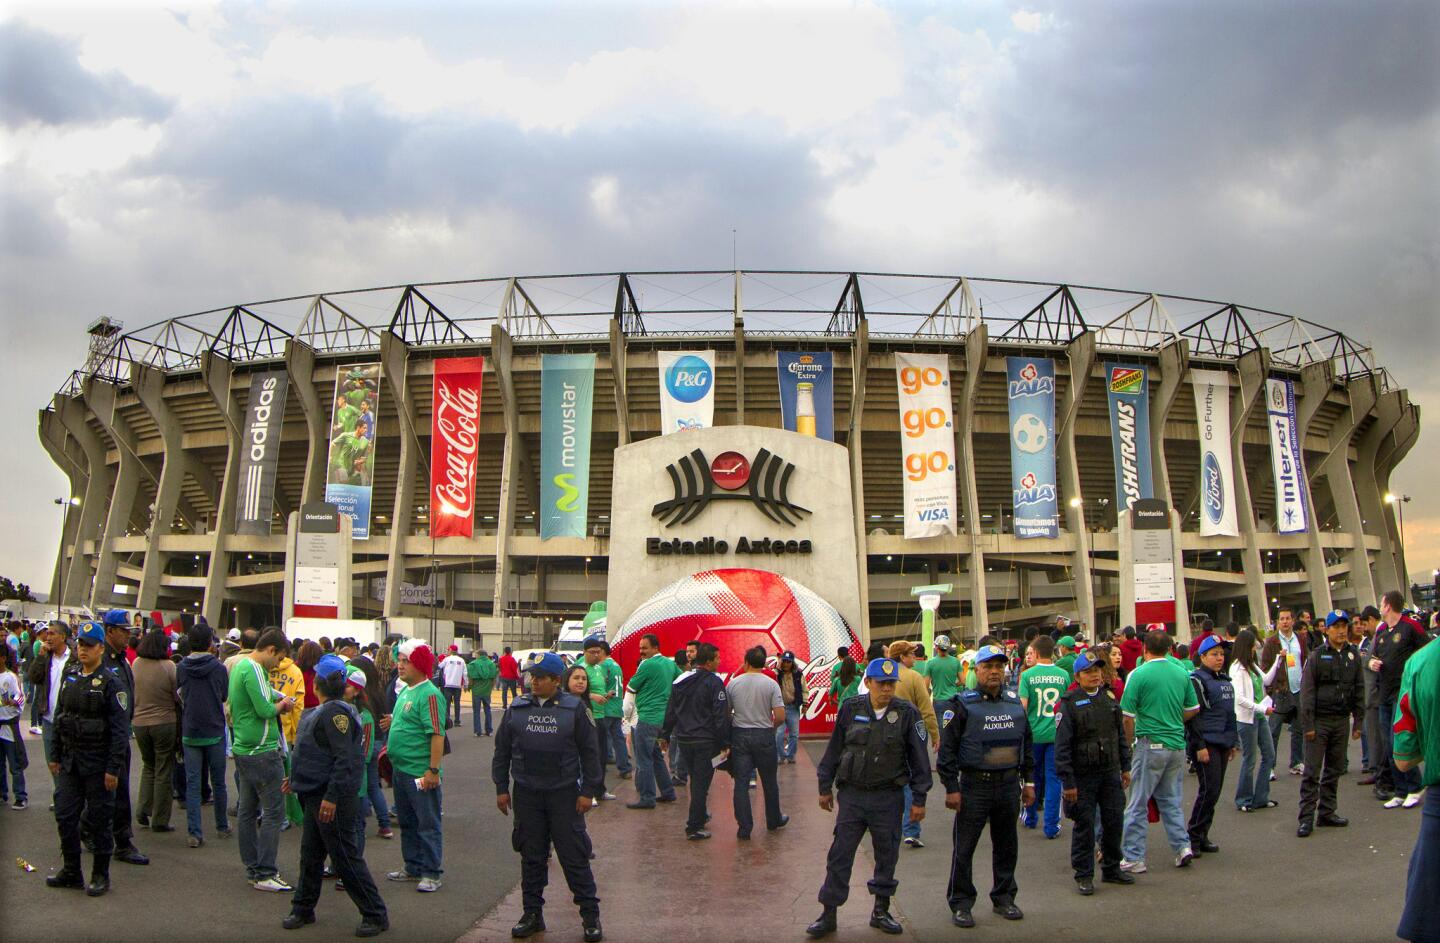 Fans attend a match between Mexico and the U.S. at the Azteca stadium in Mexico City on March 26, 2013.